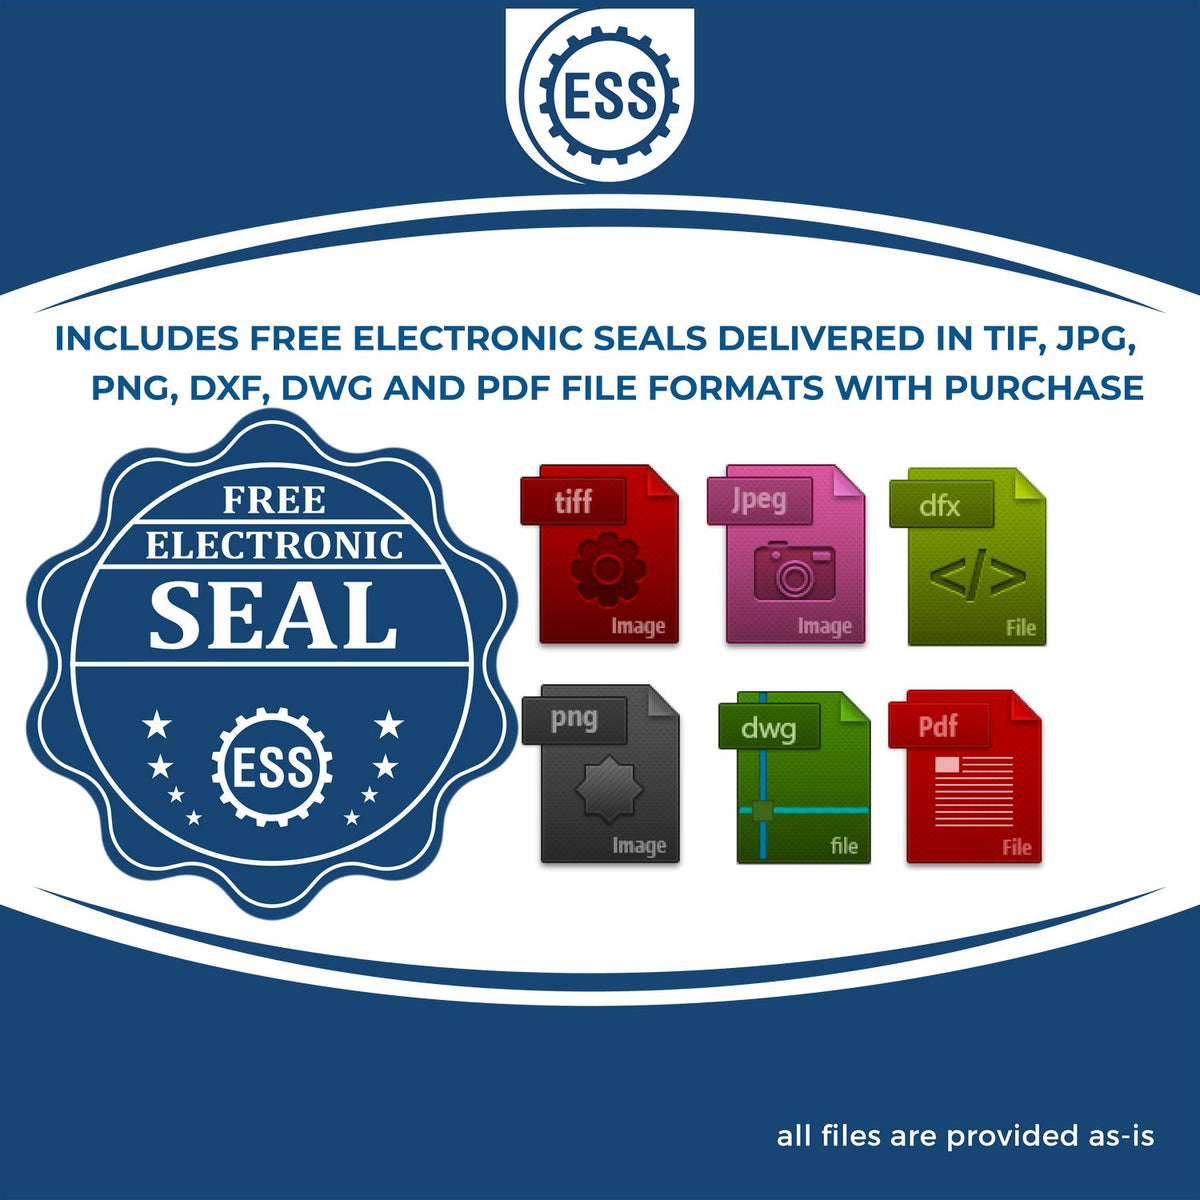 An infographic for the free electronic seal for the Heavy Duty Cast Iron Florida Geologist Seal Embosser illustrating the different file type icons such as DXF, DWG, TIF, JPG and PNG.